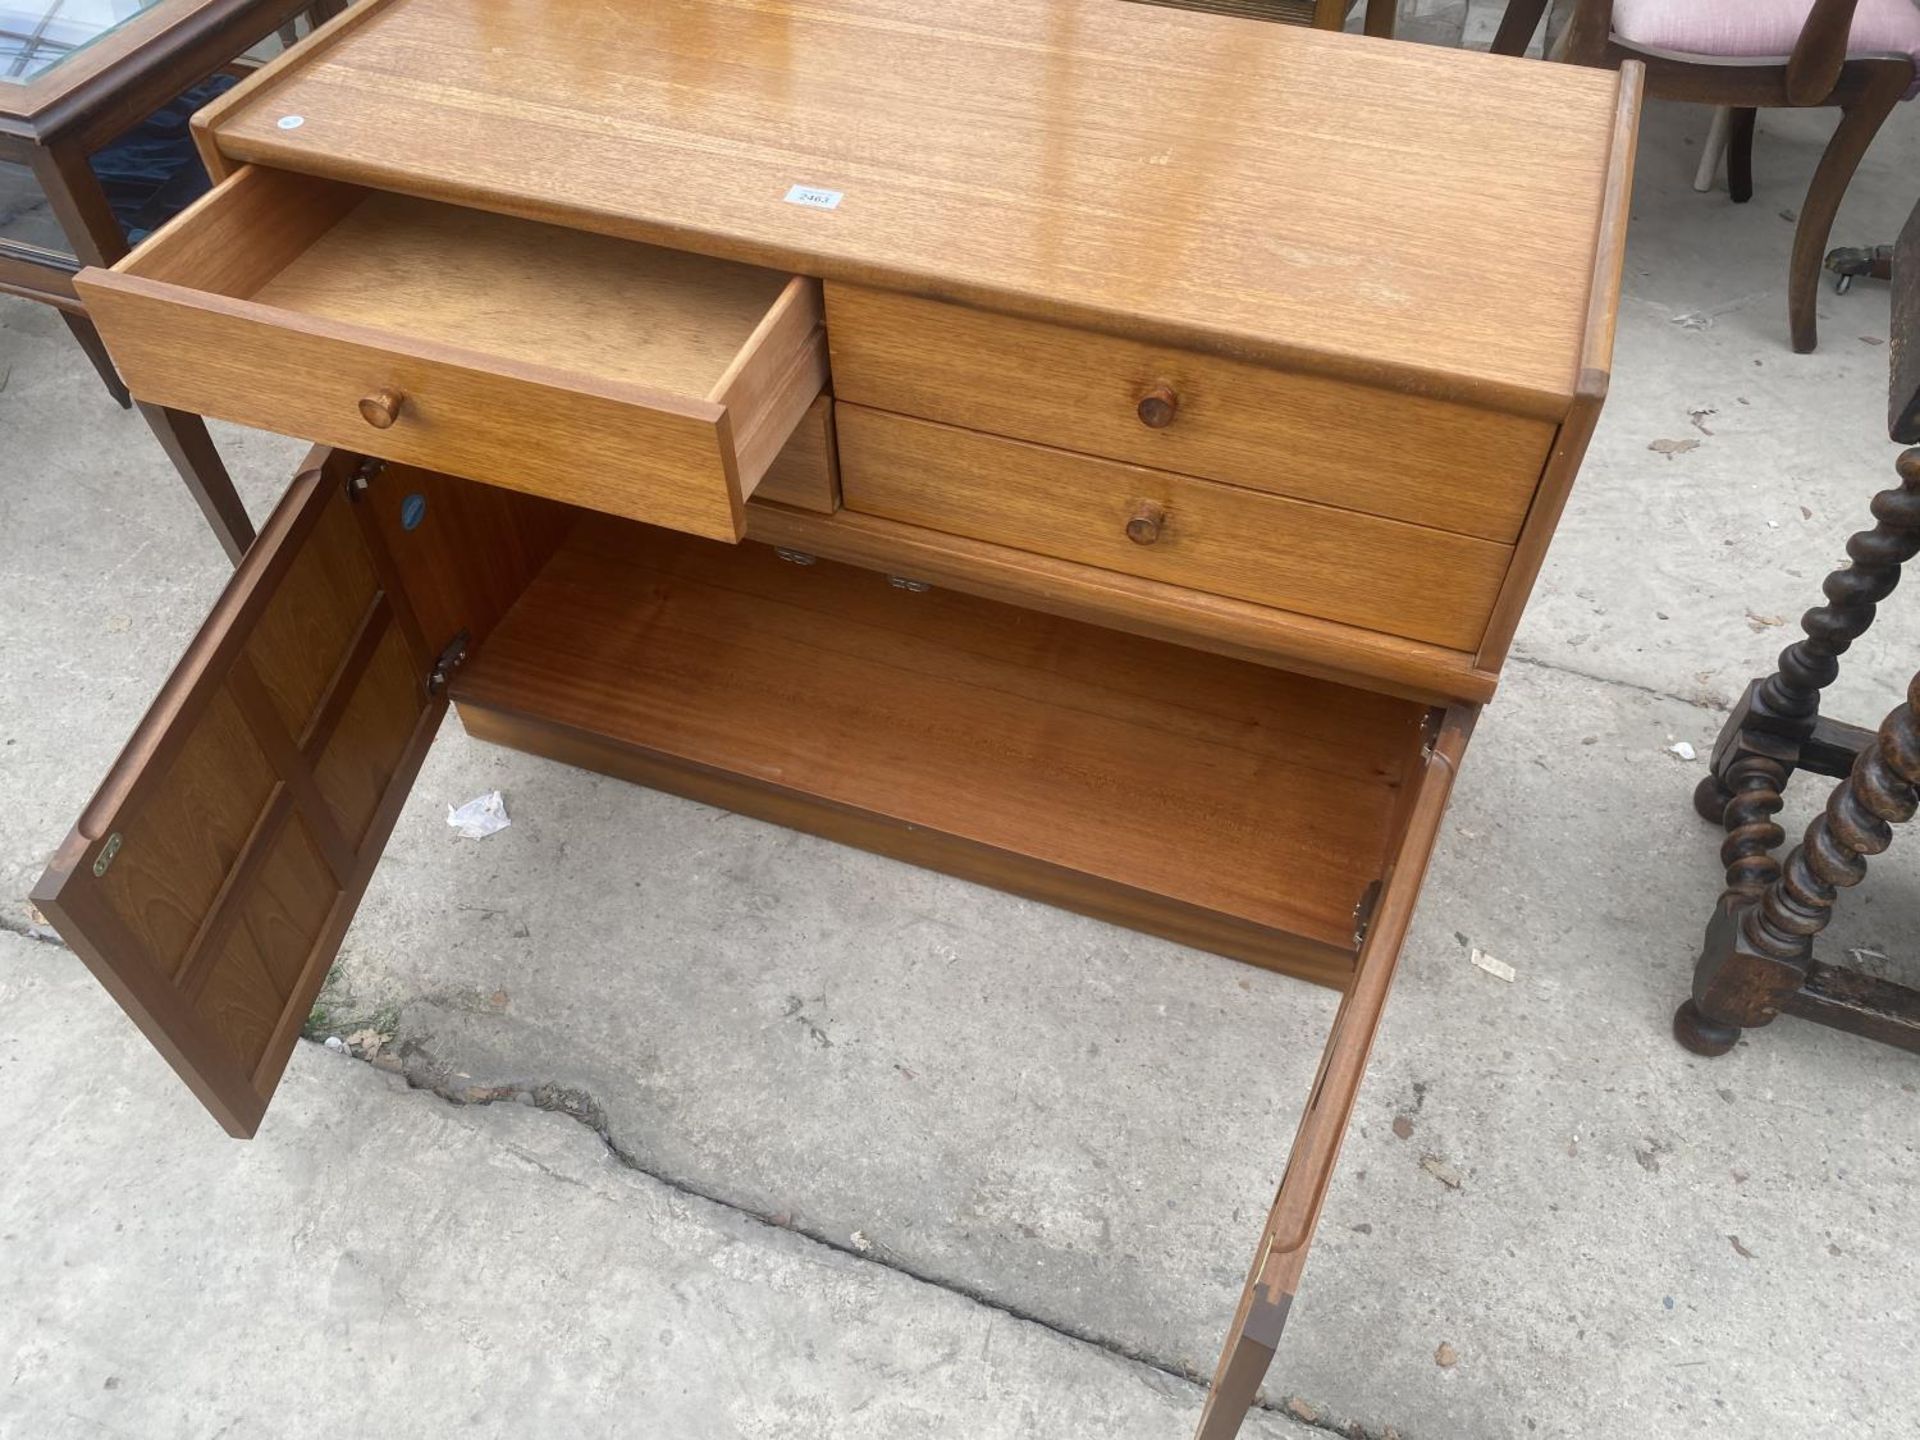 A RETRO NATHAN TEAK UNIT 40 INCHES WIDE - Image 2 of 3